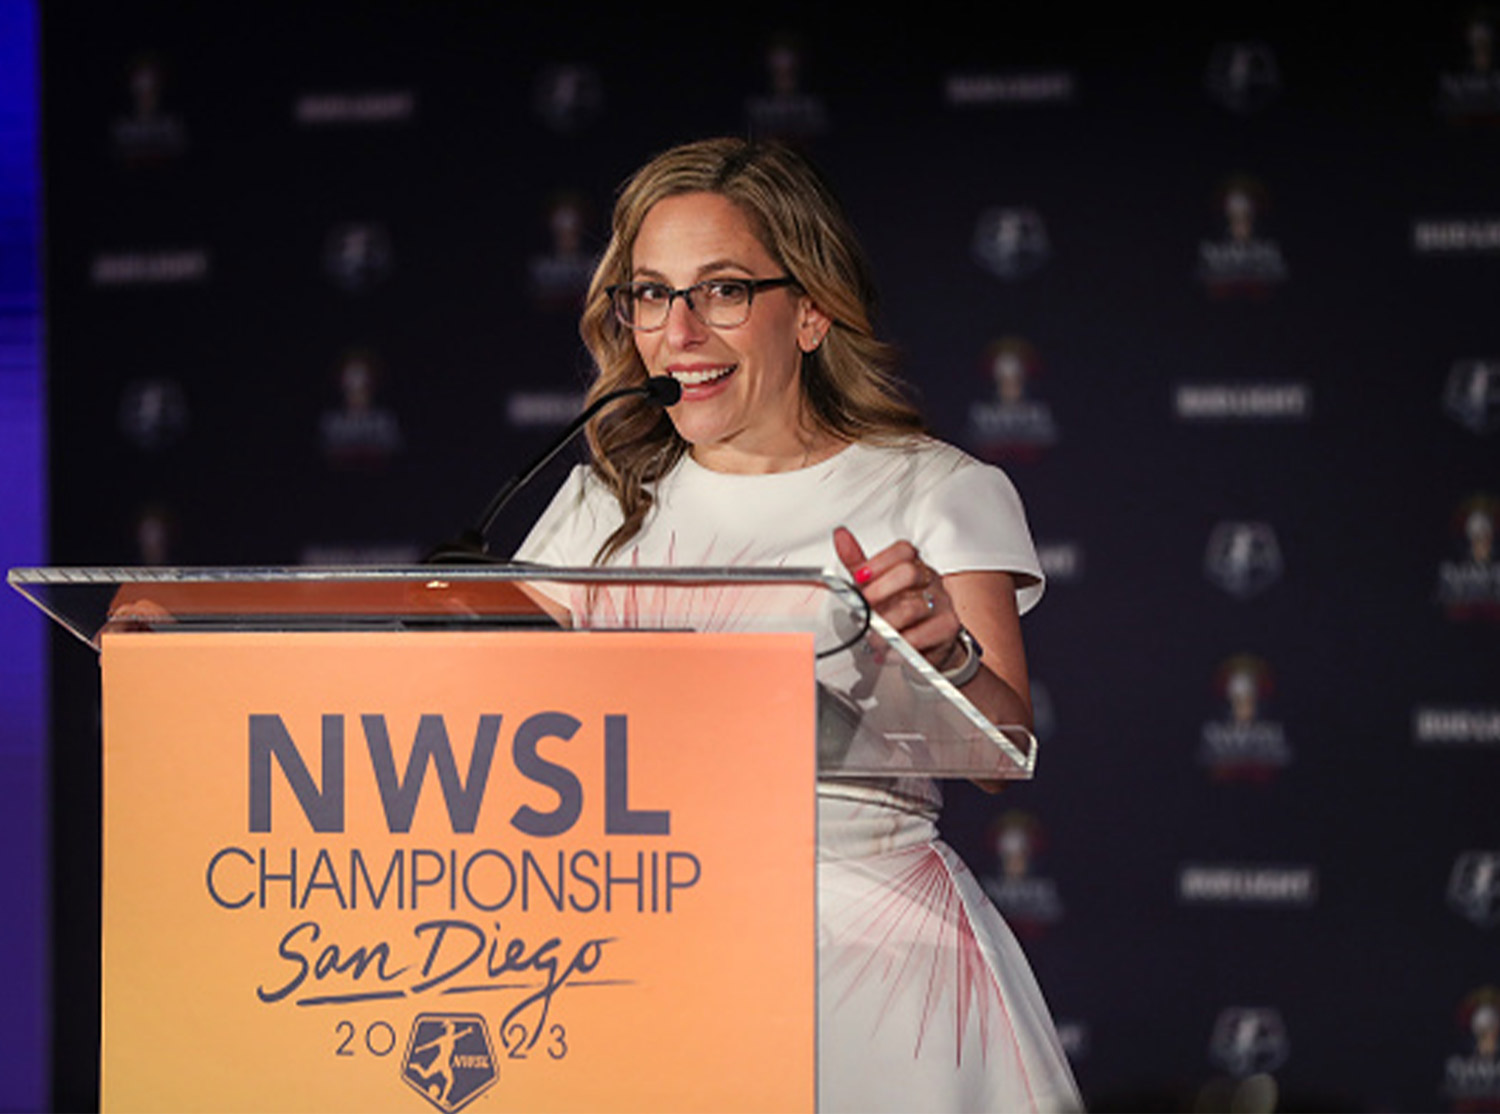 Jessica Berman wears glasses and a white dress with pink accents as she speaks at the podium of the NWSL Championship 2023 in San Diego